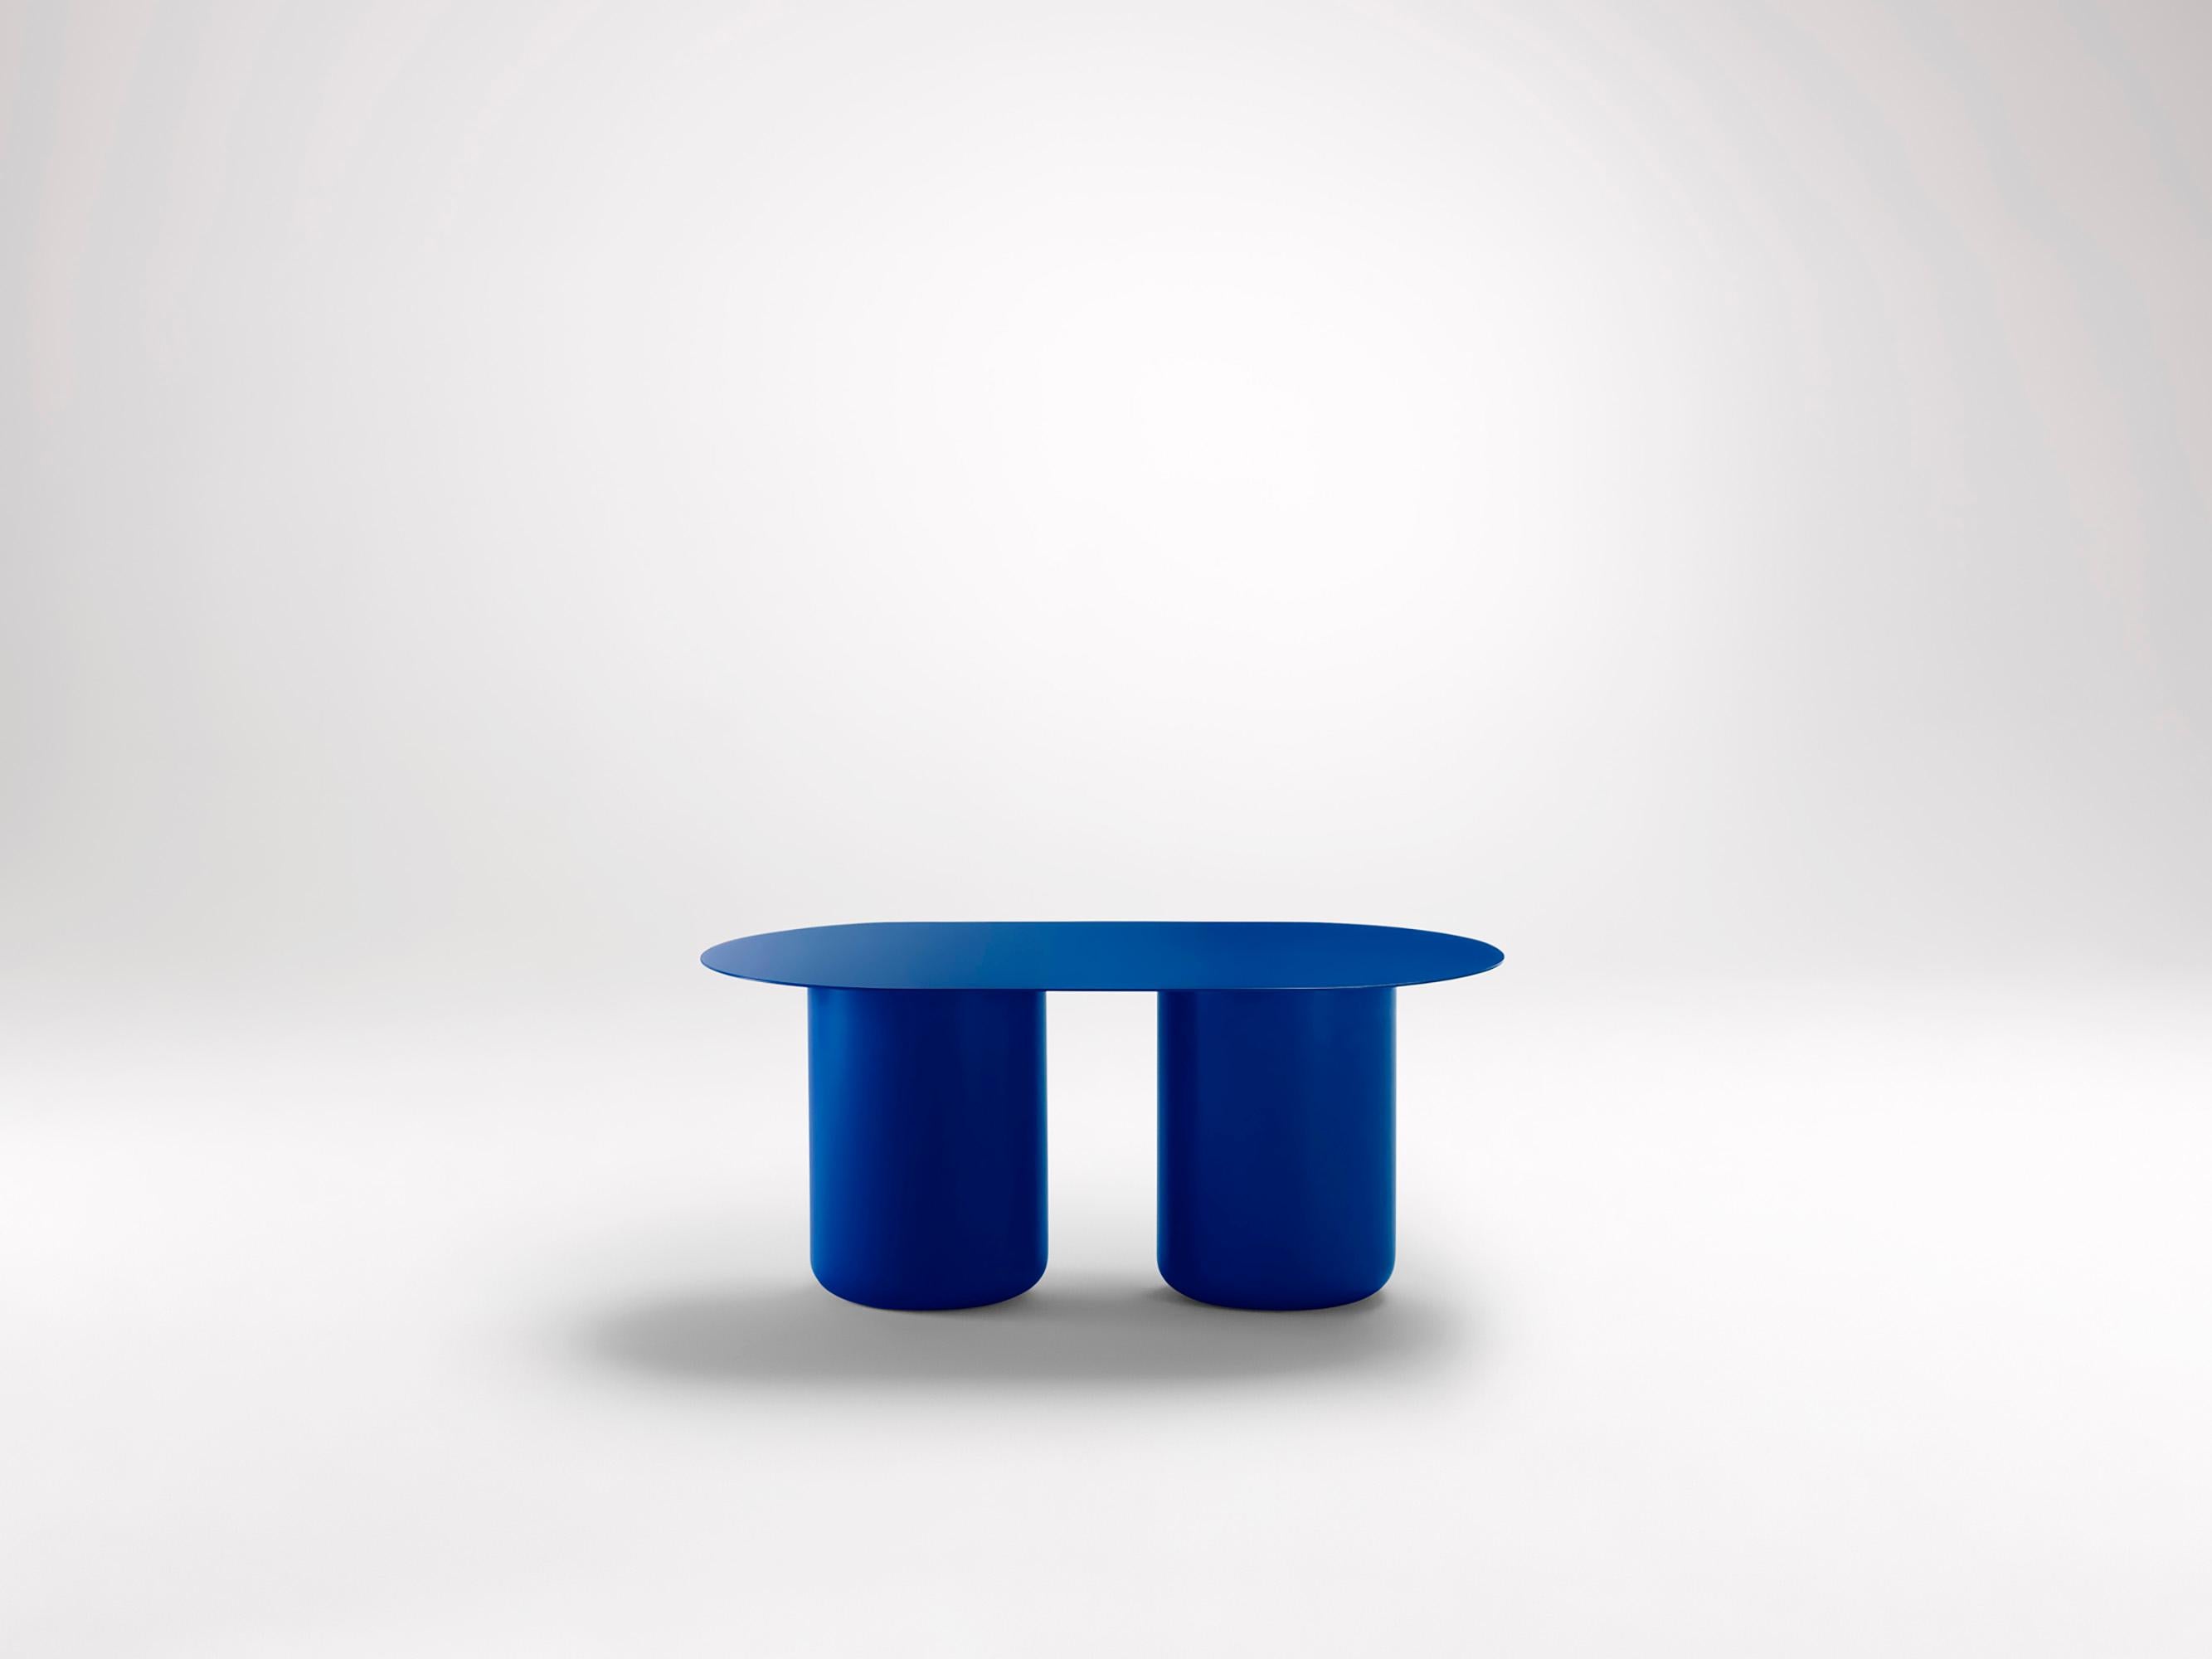 Vivid Blue Table 02 by Coco Flip
Dimensions: D 48 / 85 x H 32 / 36 / 40 / 42 cm
Materials: Mild steel, powder-coated with zinc undercoat. 
Weight: 20 kg

Coco Flip is a Melbourne based furniture and lighting design studio, run by us, Kate Stokes and